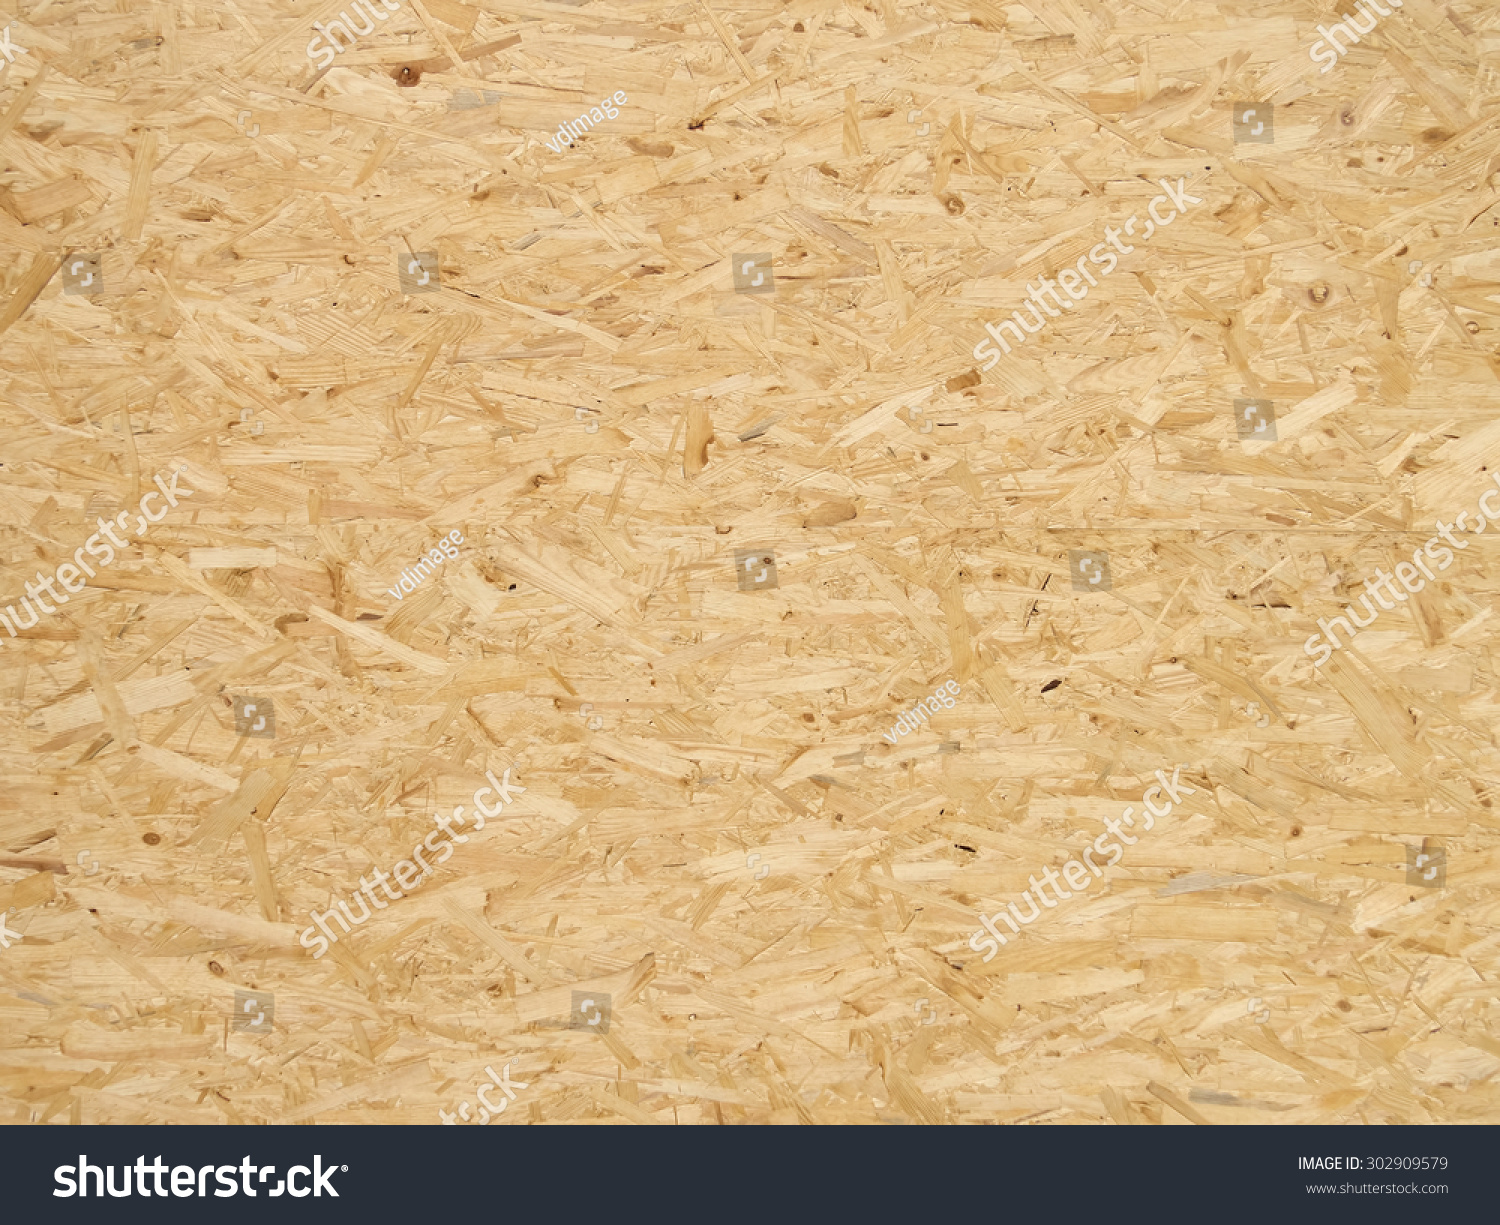 Pressed wooden panel background, seamless texture of oriented strand board - OSB #302909579